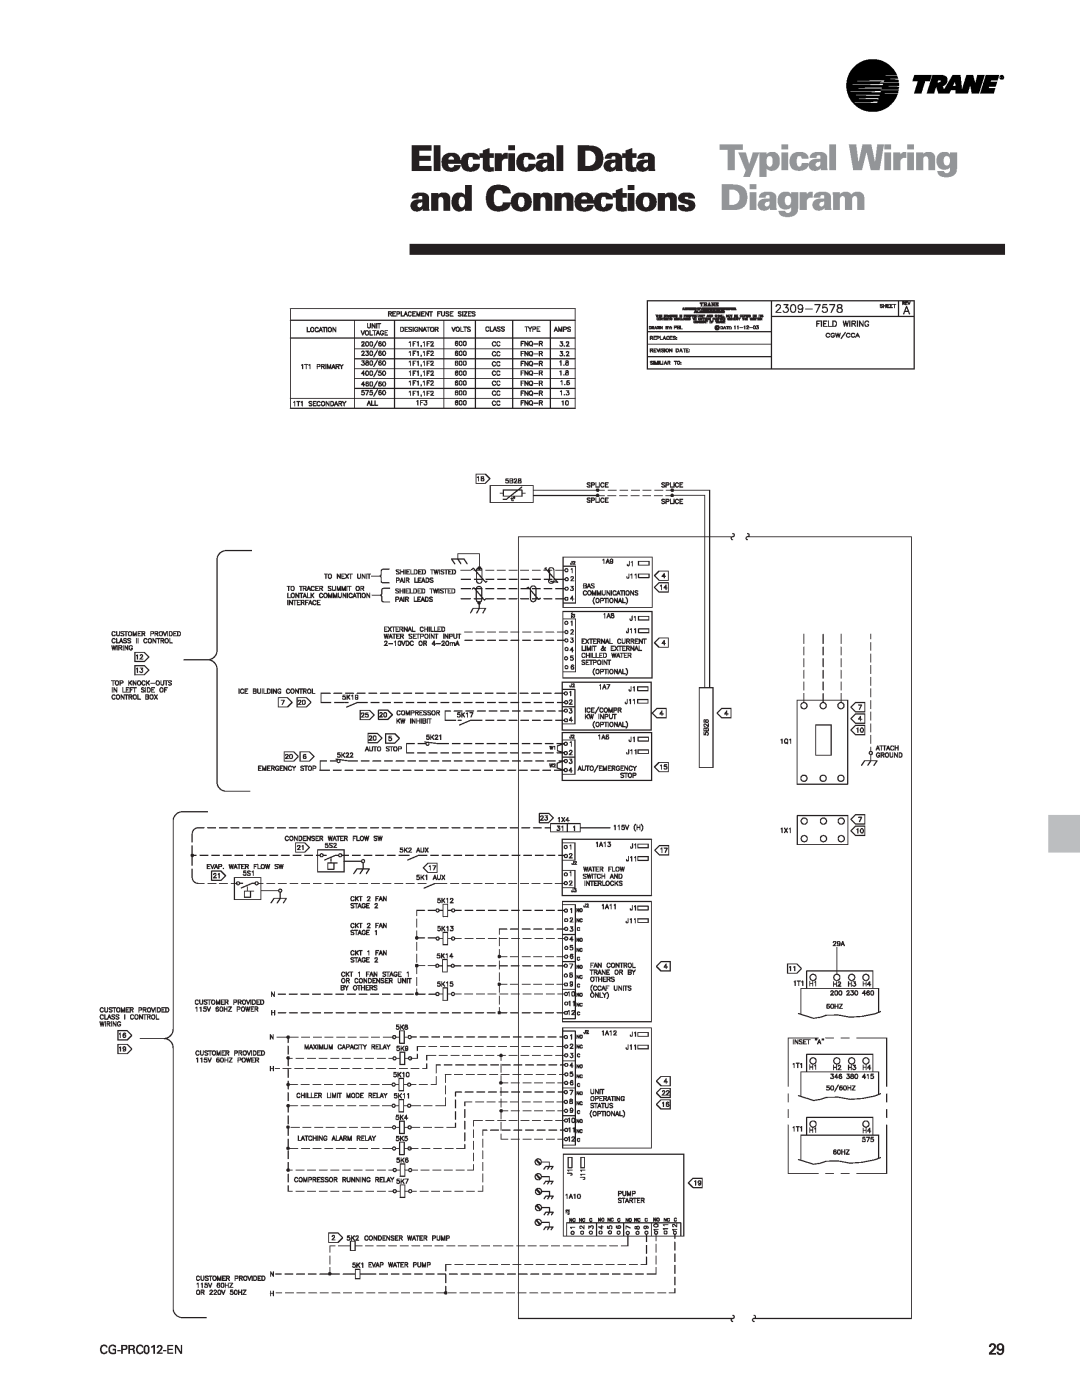 Trane CCAF, CGWF manual and Connections, Electrical Data, Typical Wiring, Diagram 